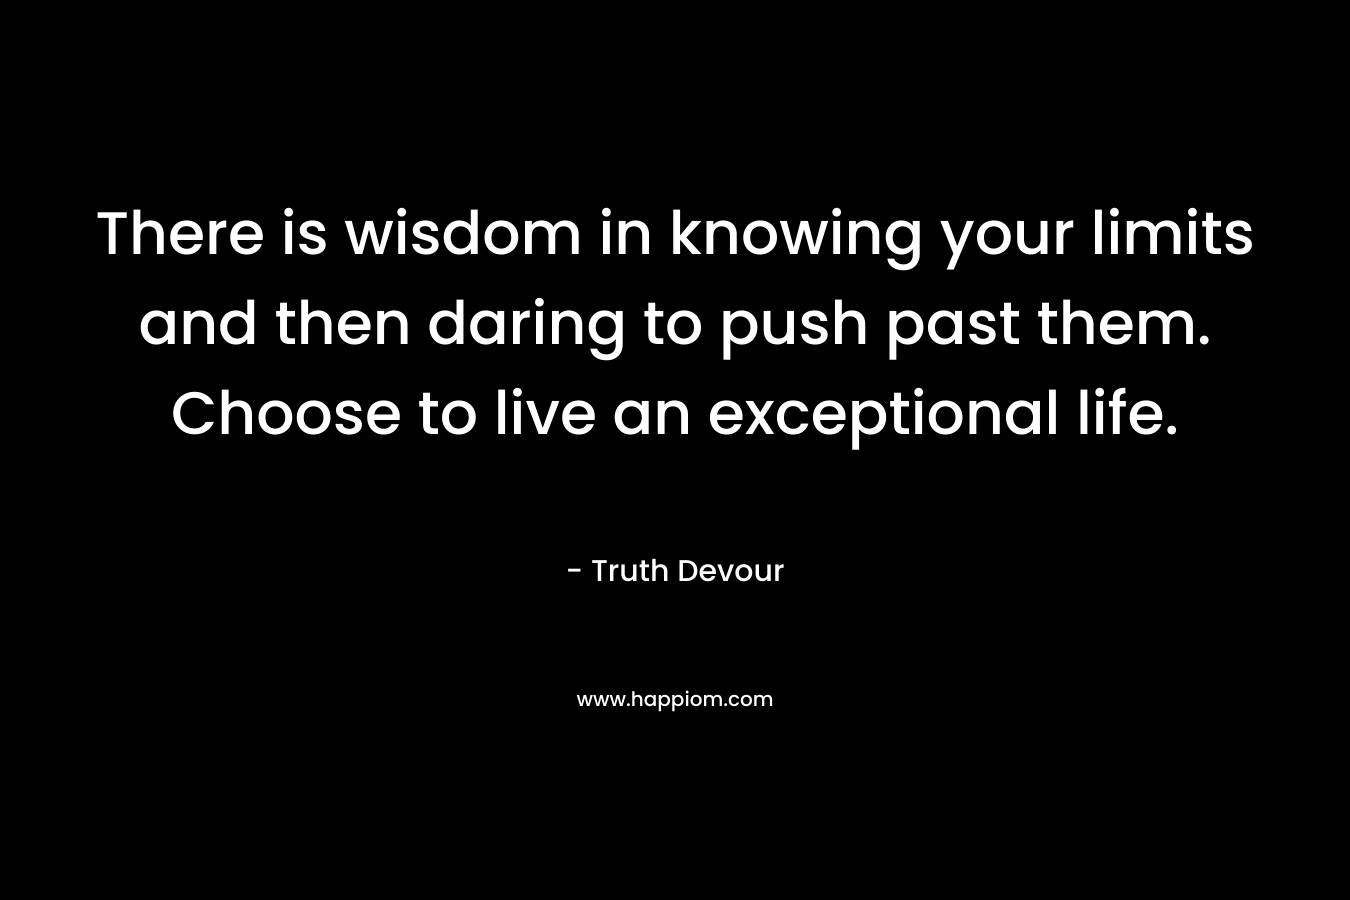 There is wisdom in knowing your limits and then daring to push past them. Choose to live an exceptional life. – Truth Devour